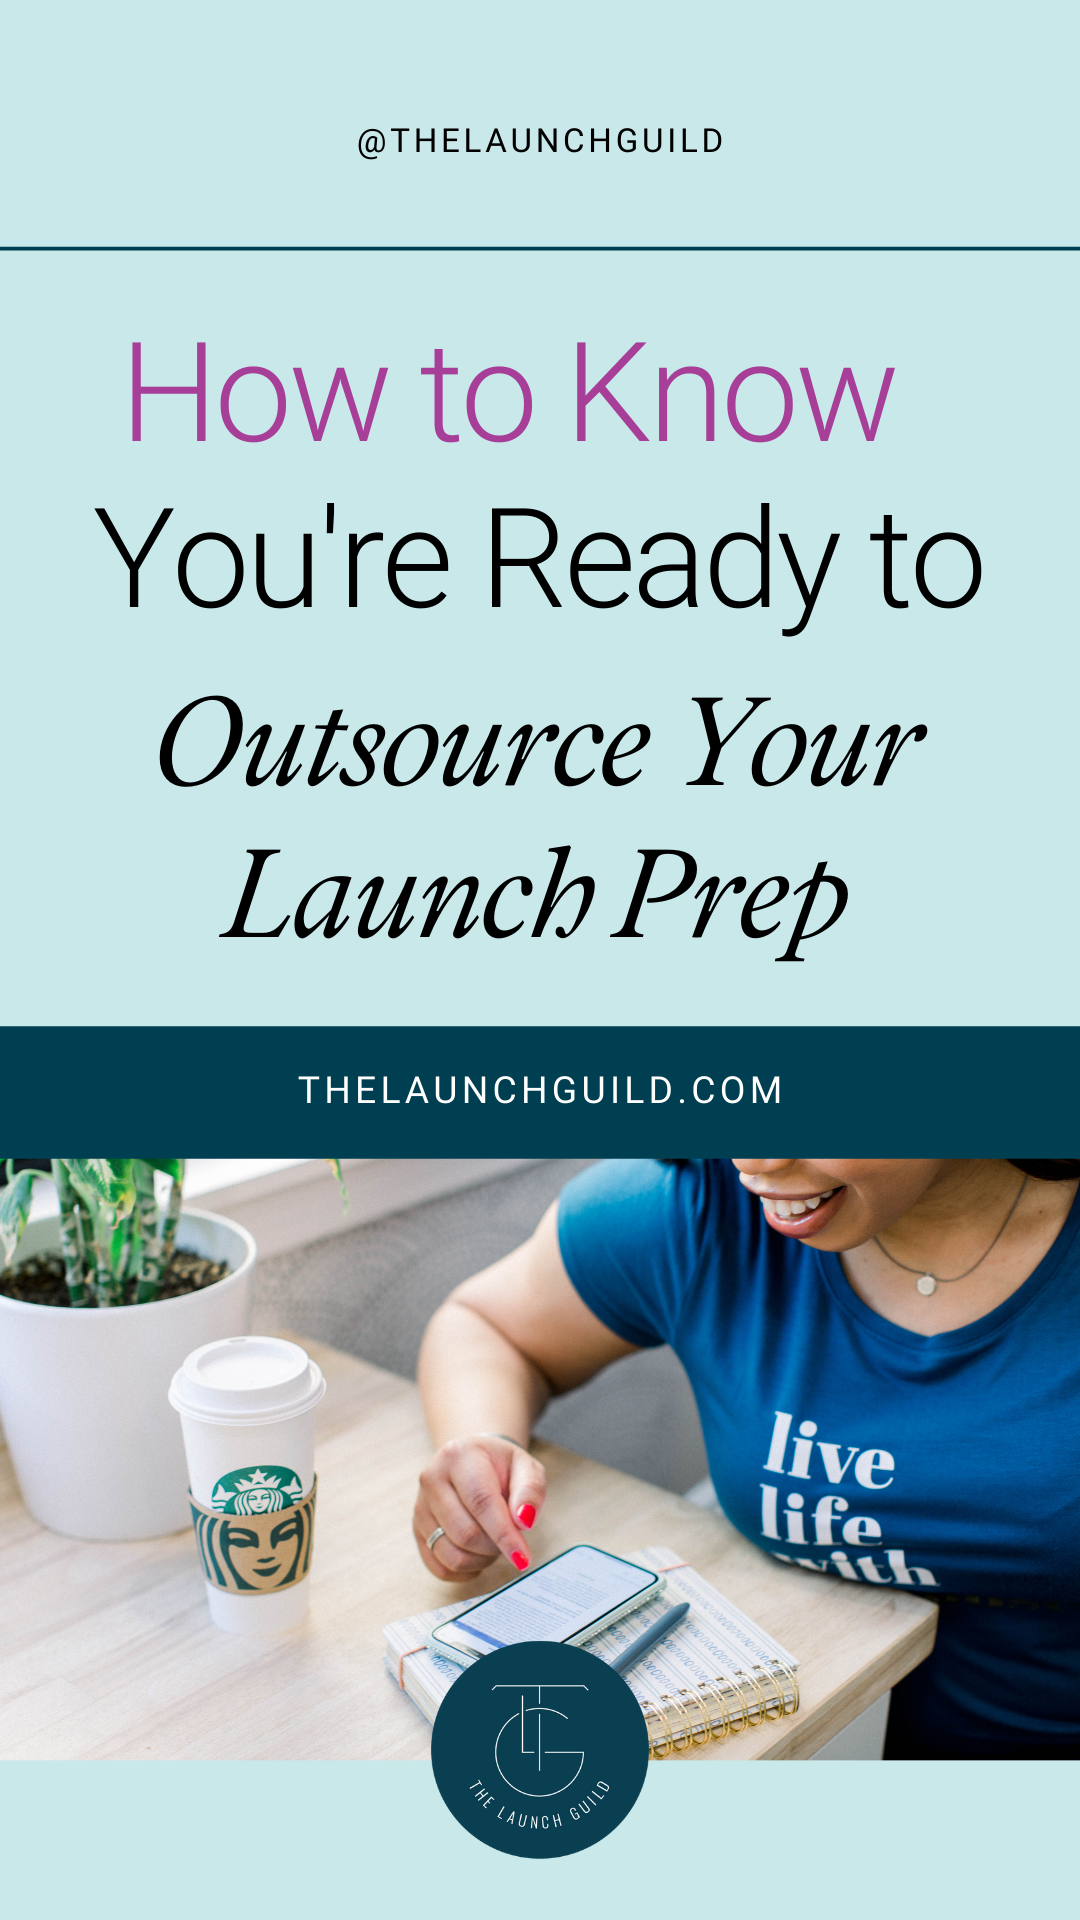 Title: How to Know You're Ready to Outsource Your Launch Prep